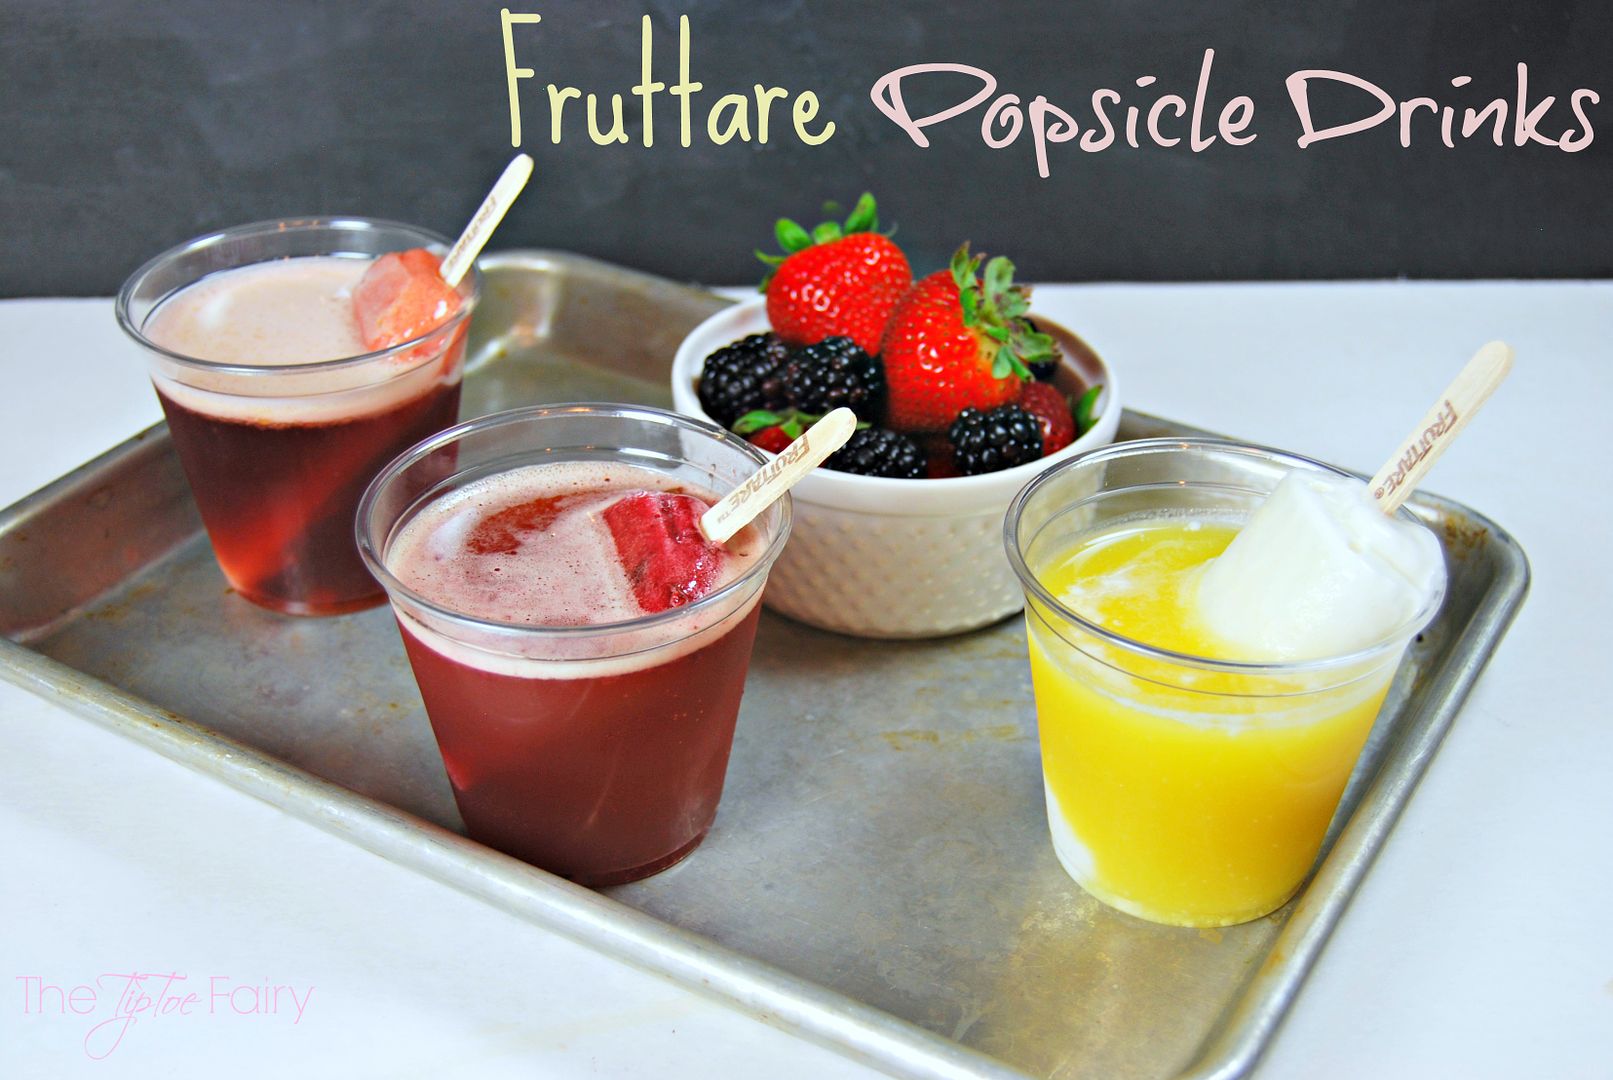 Popsicle Drinks with Fruttare fruit bars and sparkling fruit juices | The TipToe Fairy #FruttareMusic #PMedia #ad #popsicledrinks 